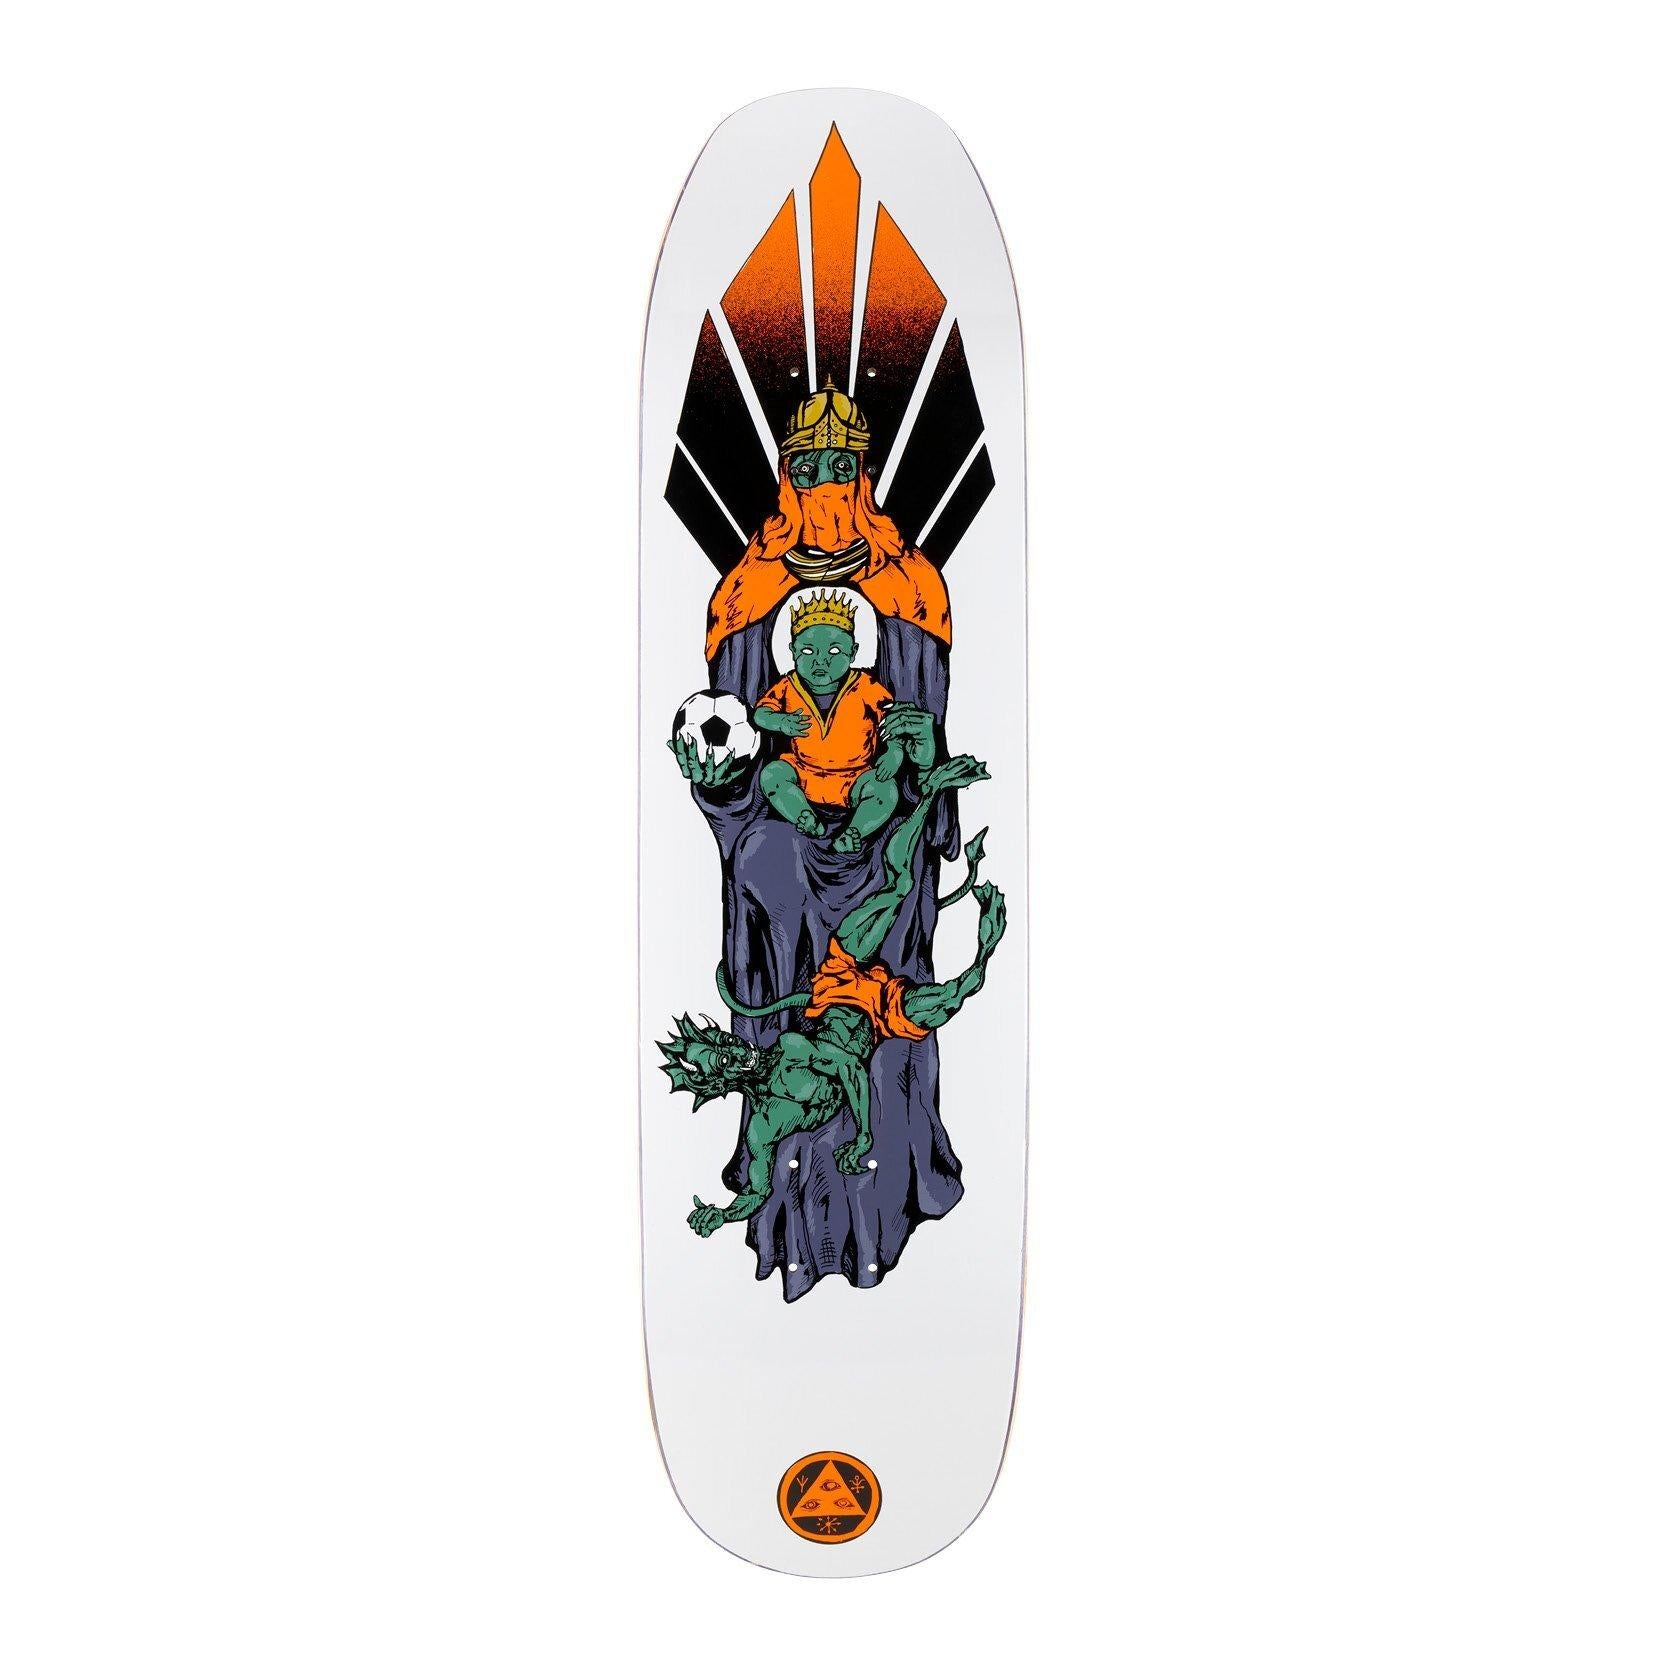 FIRE SALE Welcome Skateboards "Futbol on son of Moontrimmer" 8.25" Deck